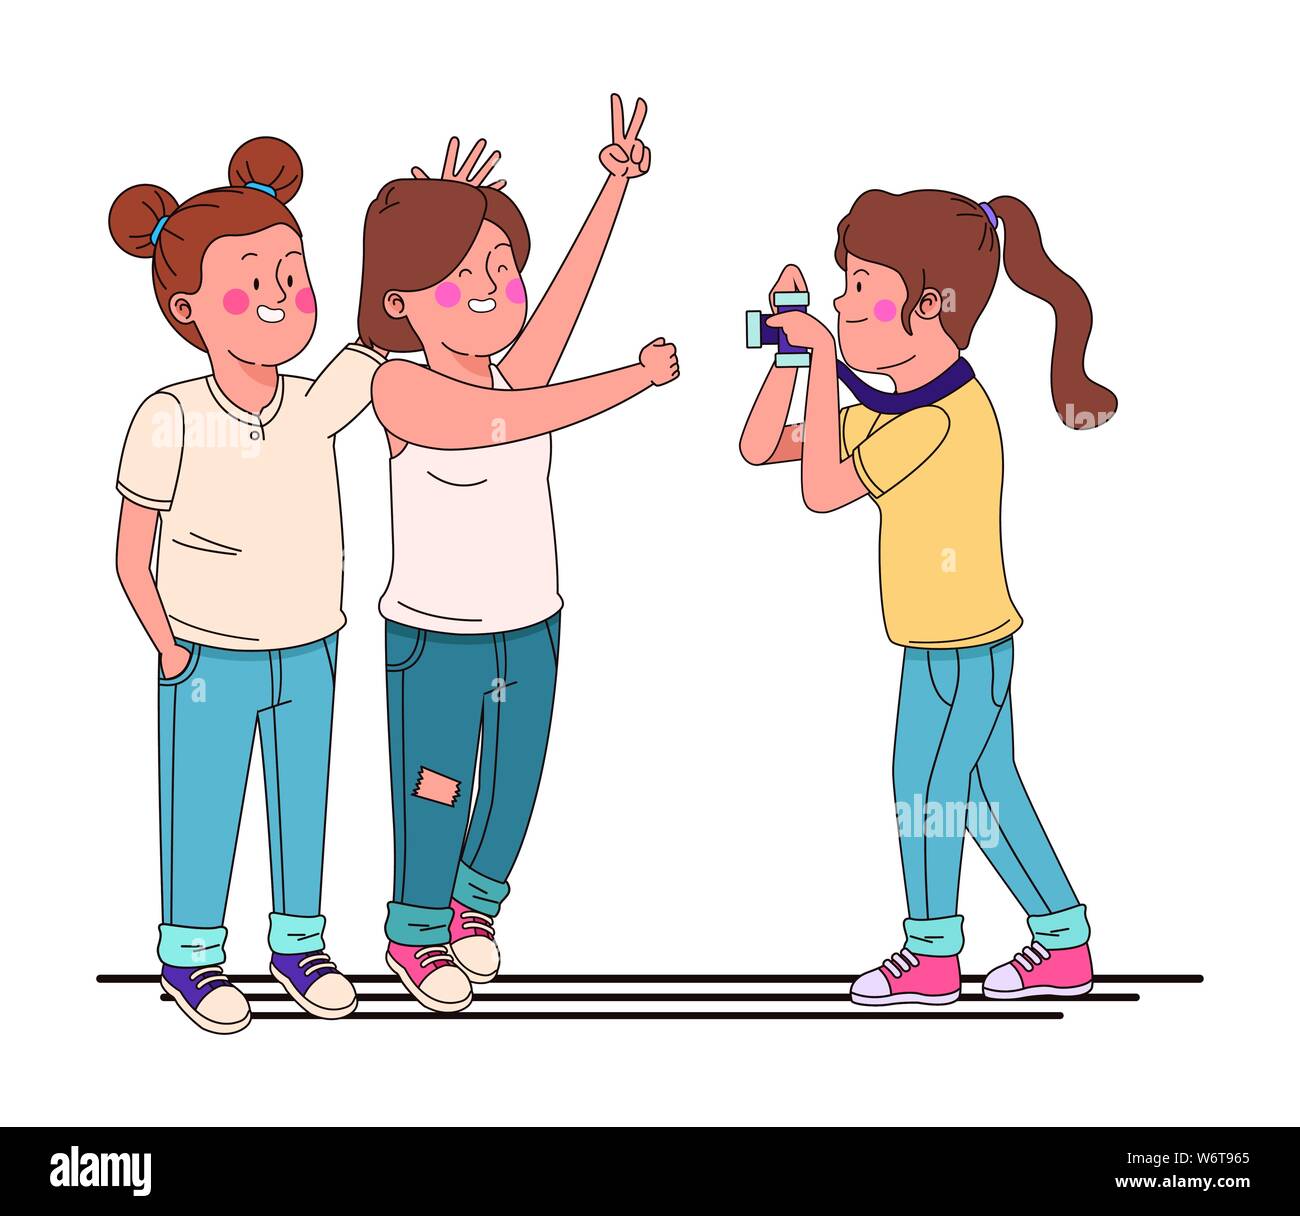 Teenagers friends smiling and having fun Stock Vector